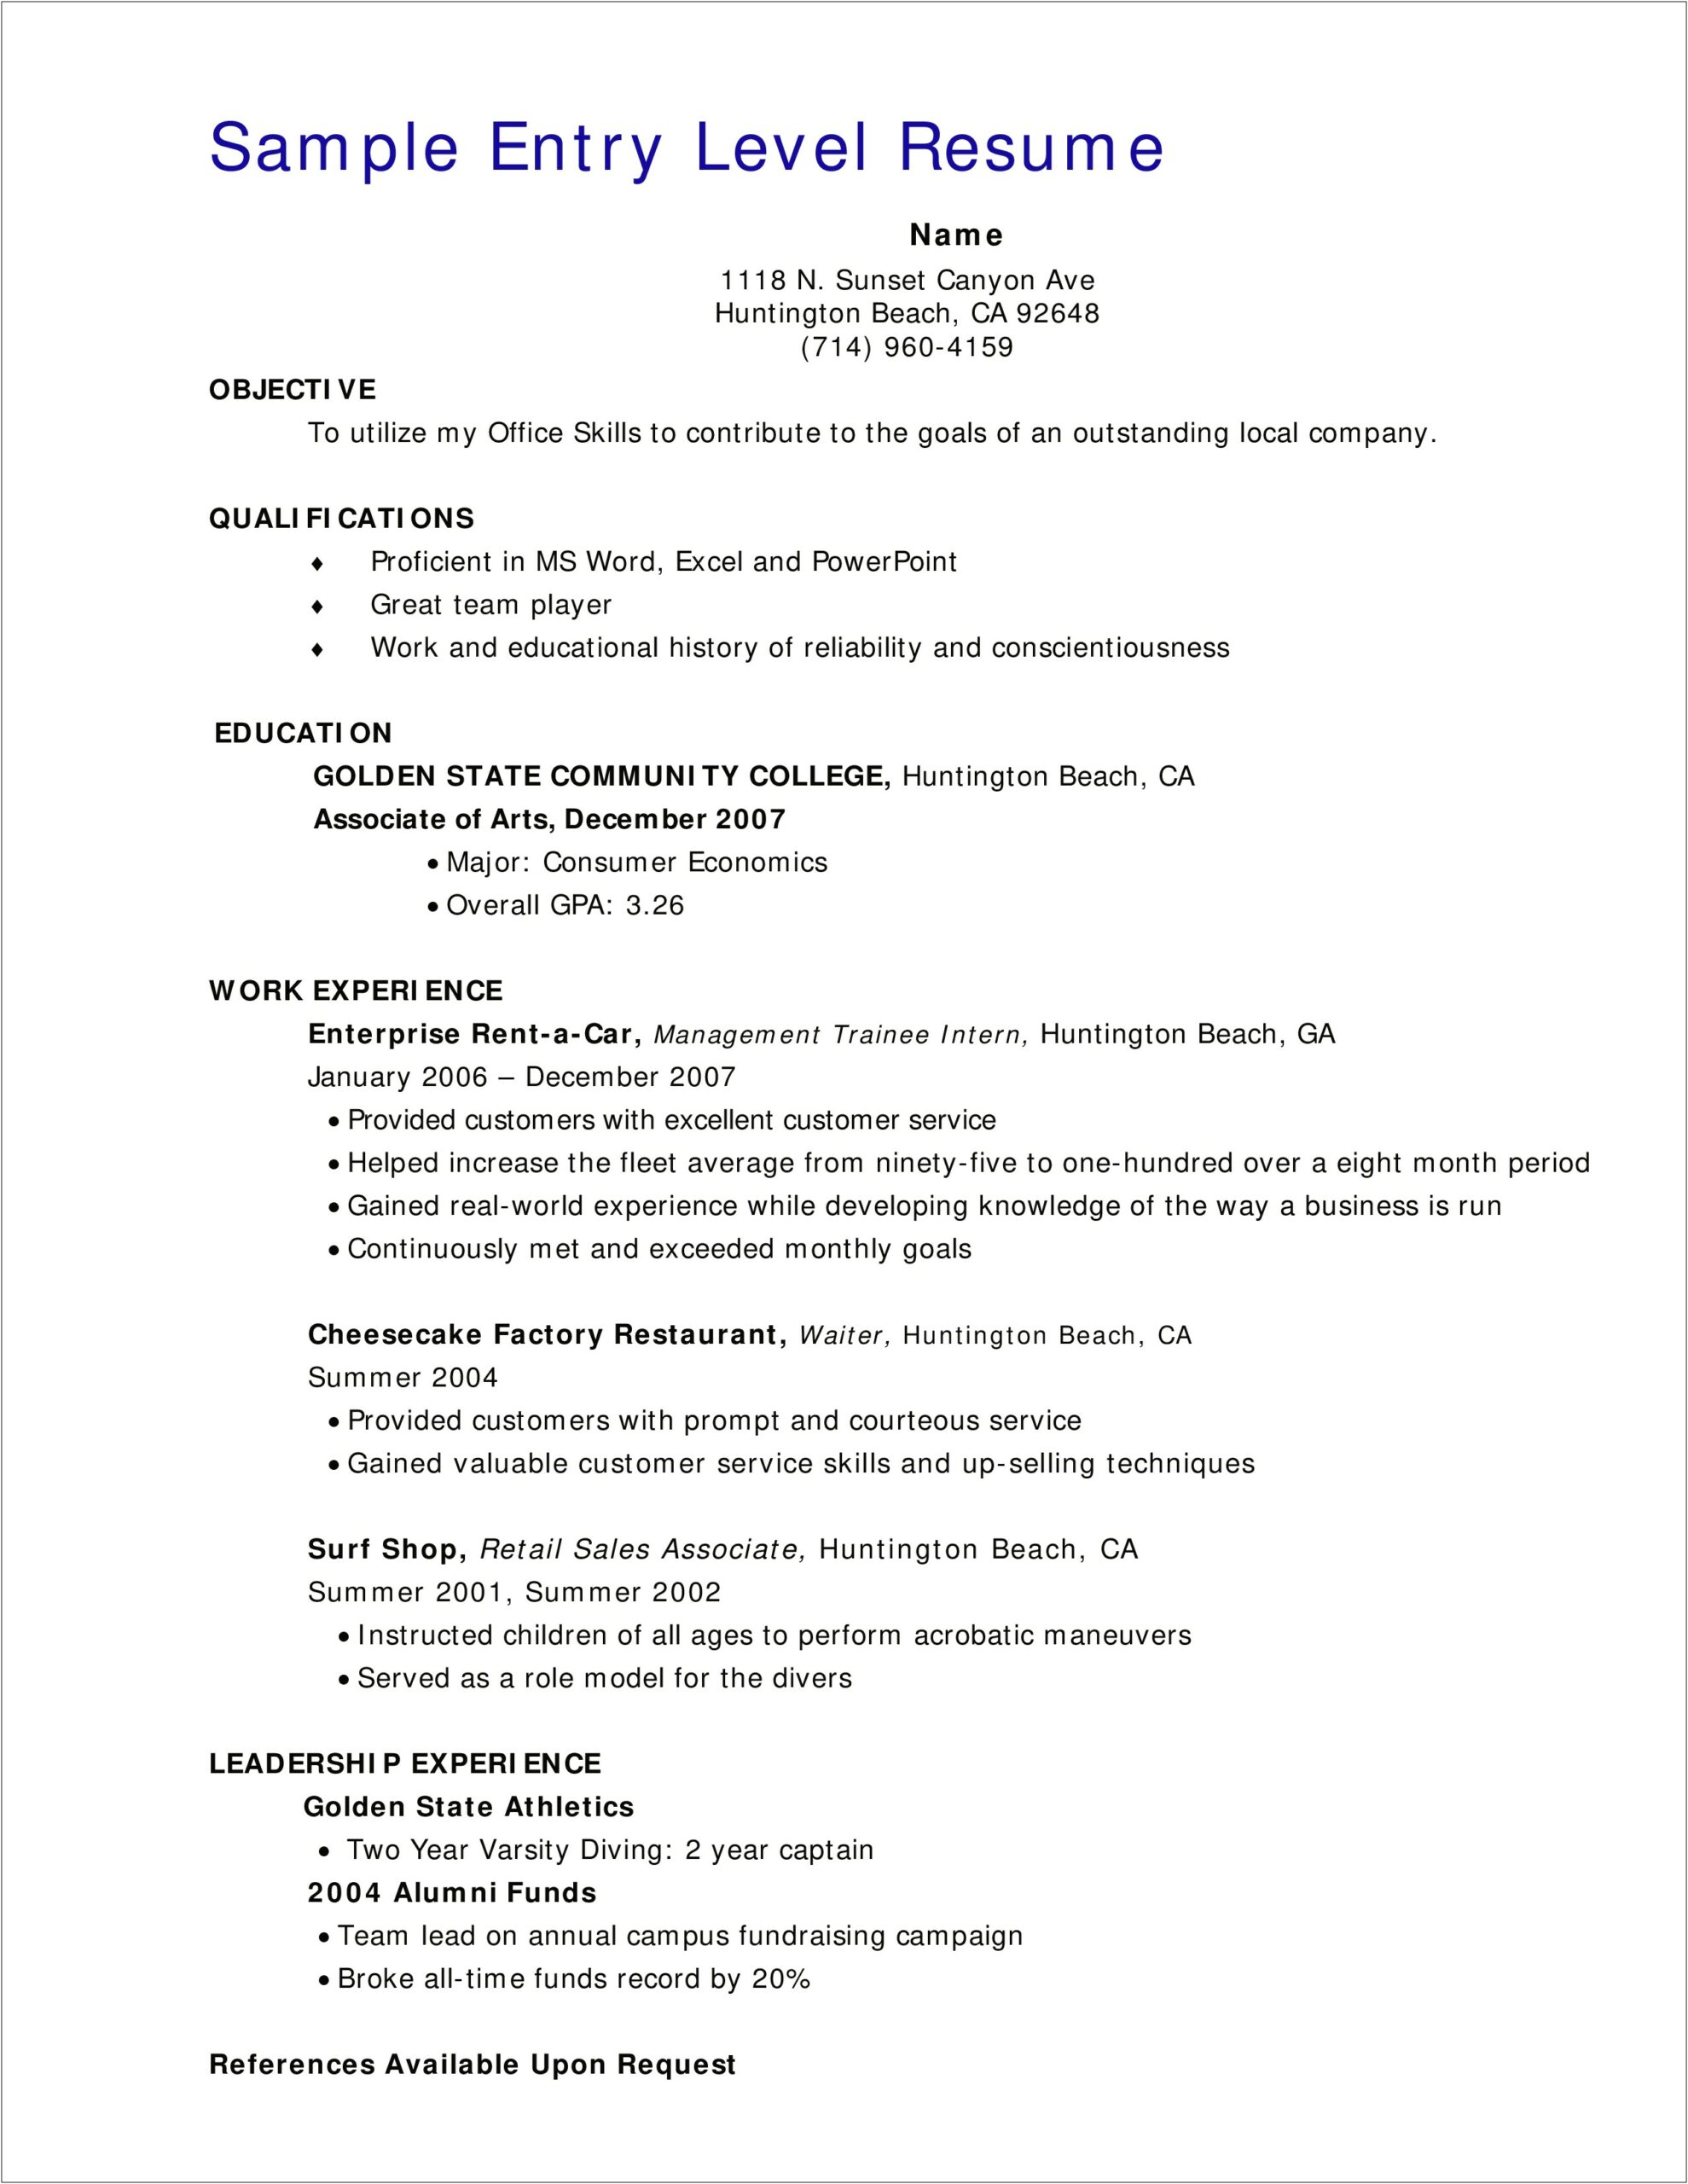 Resume Example With References Available Upon Request